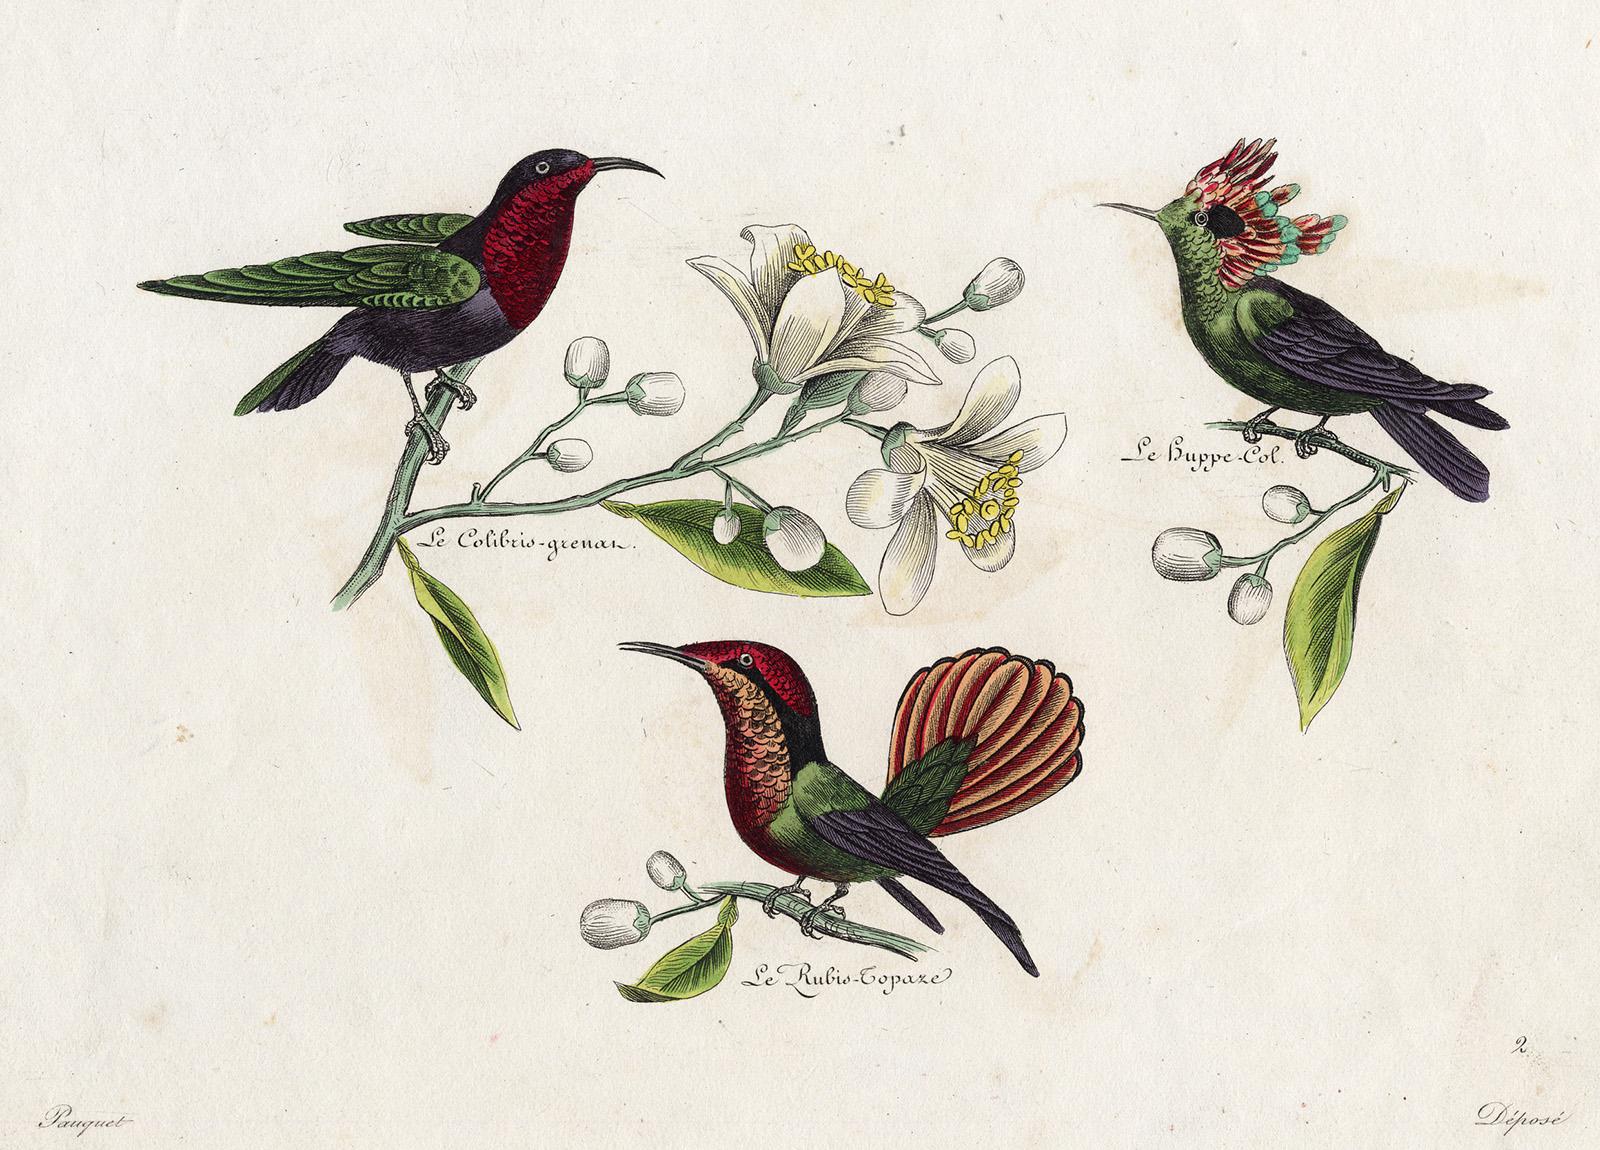 Hippolyte Louis Emile Pauquet and Polydore Pauquet Animal Print - Three different Hummingbirds by Pauquet - Hand coloured engraving - 19th century